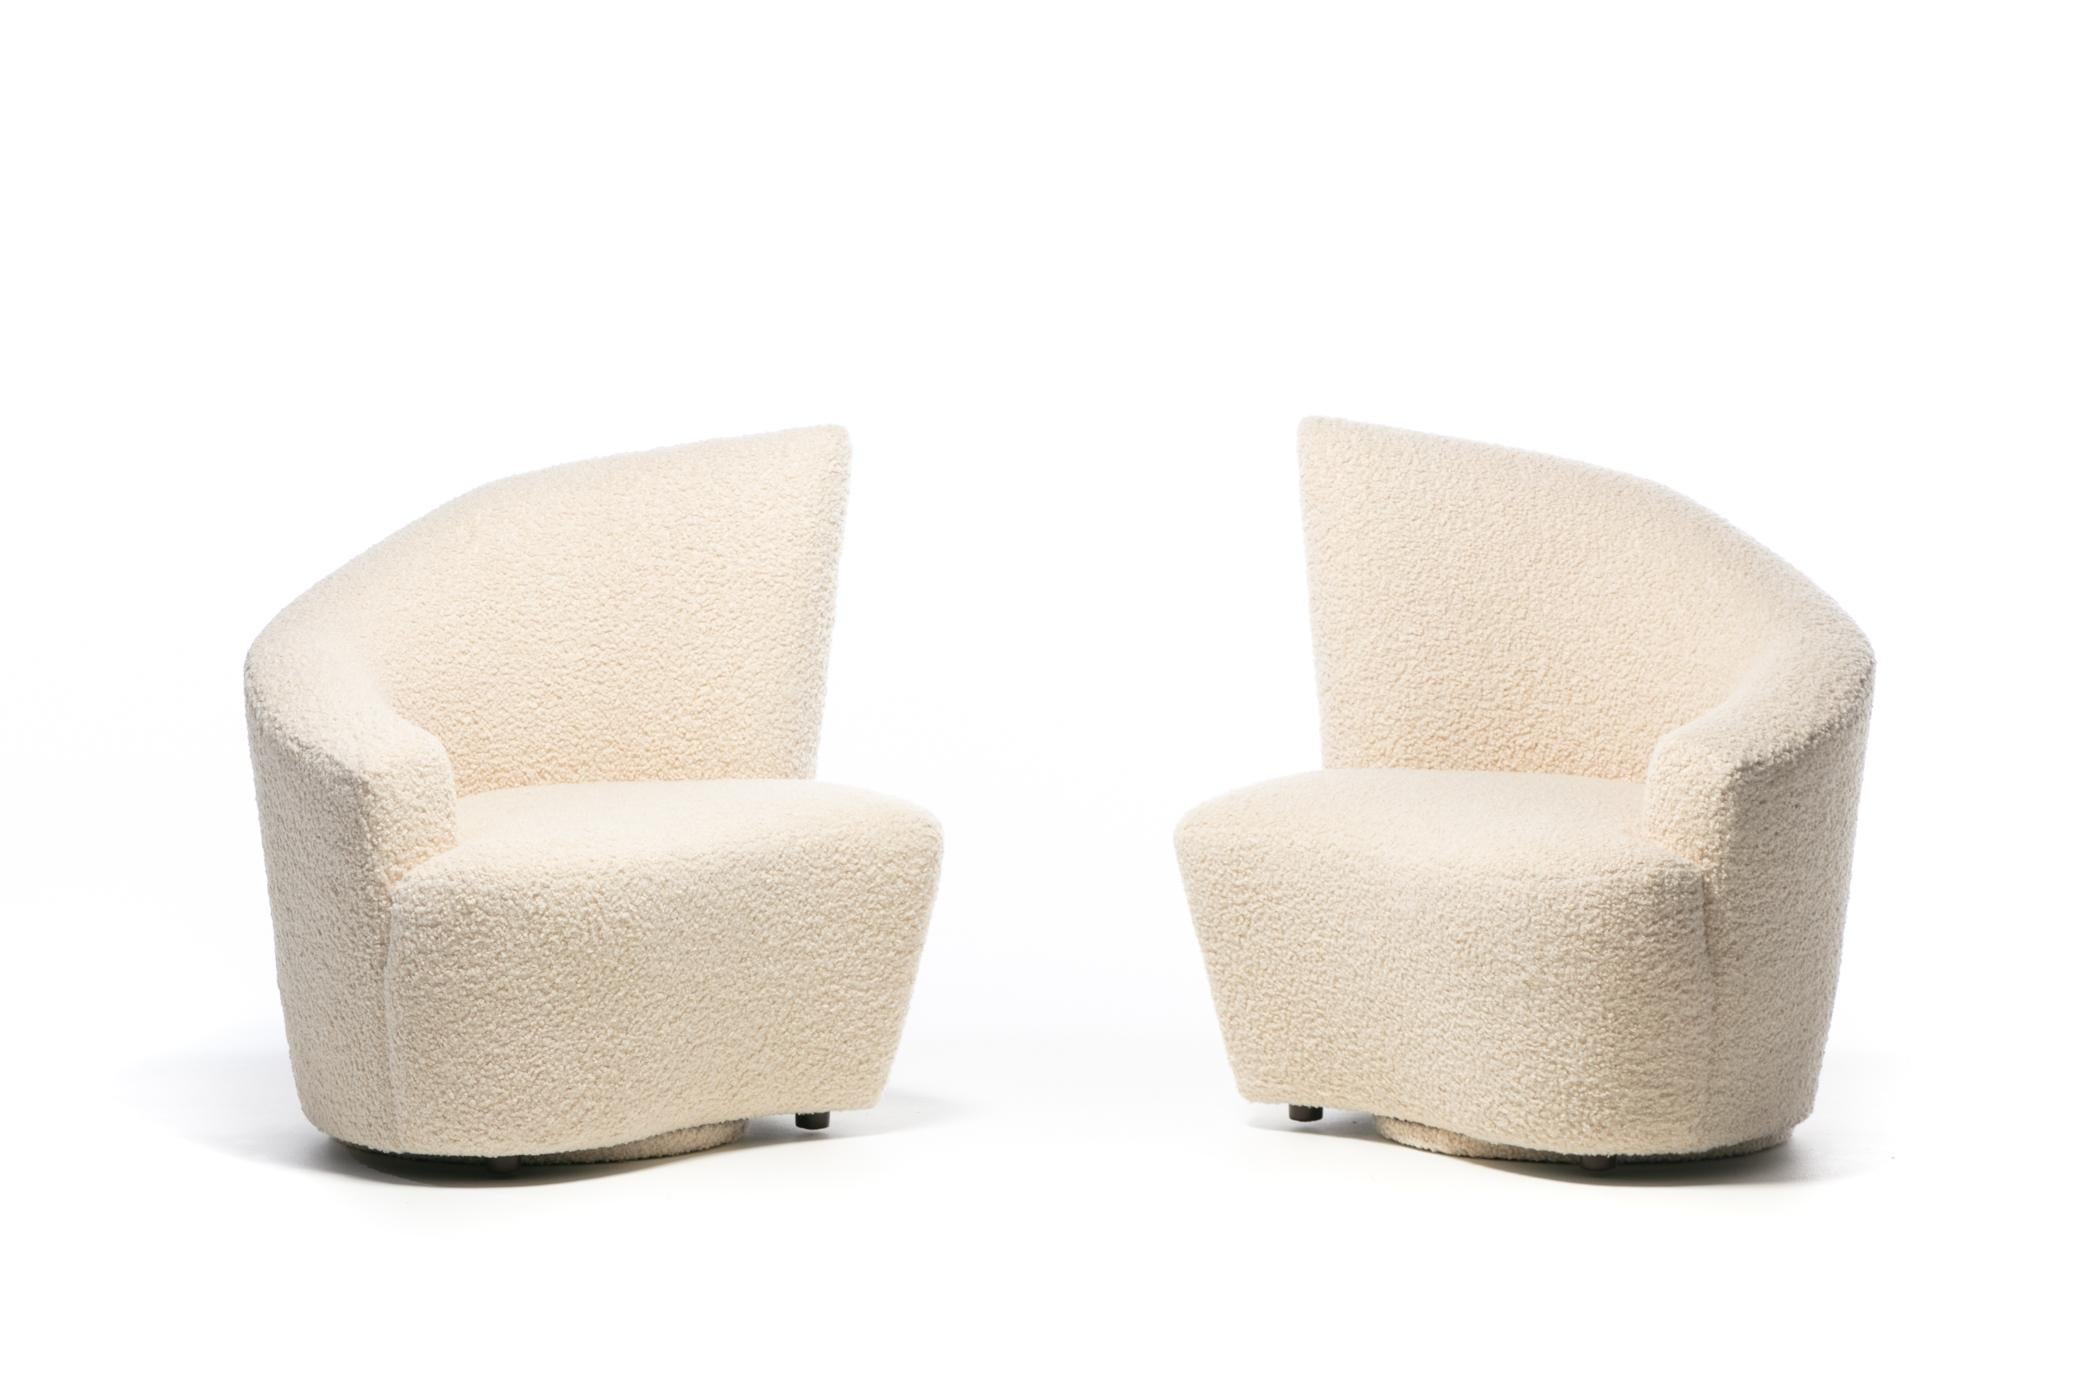 Vladimir Kagan Bilbao Swivel Slipper Chairs in Ivory Bouclé In Good Condition For Sale In Saint Louis, MO